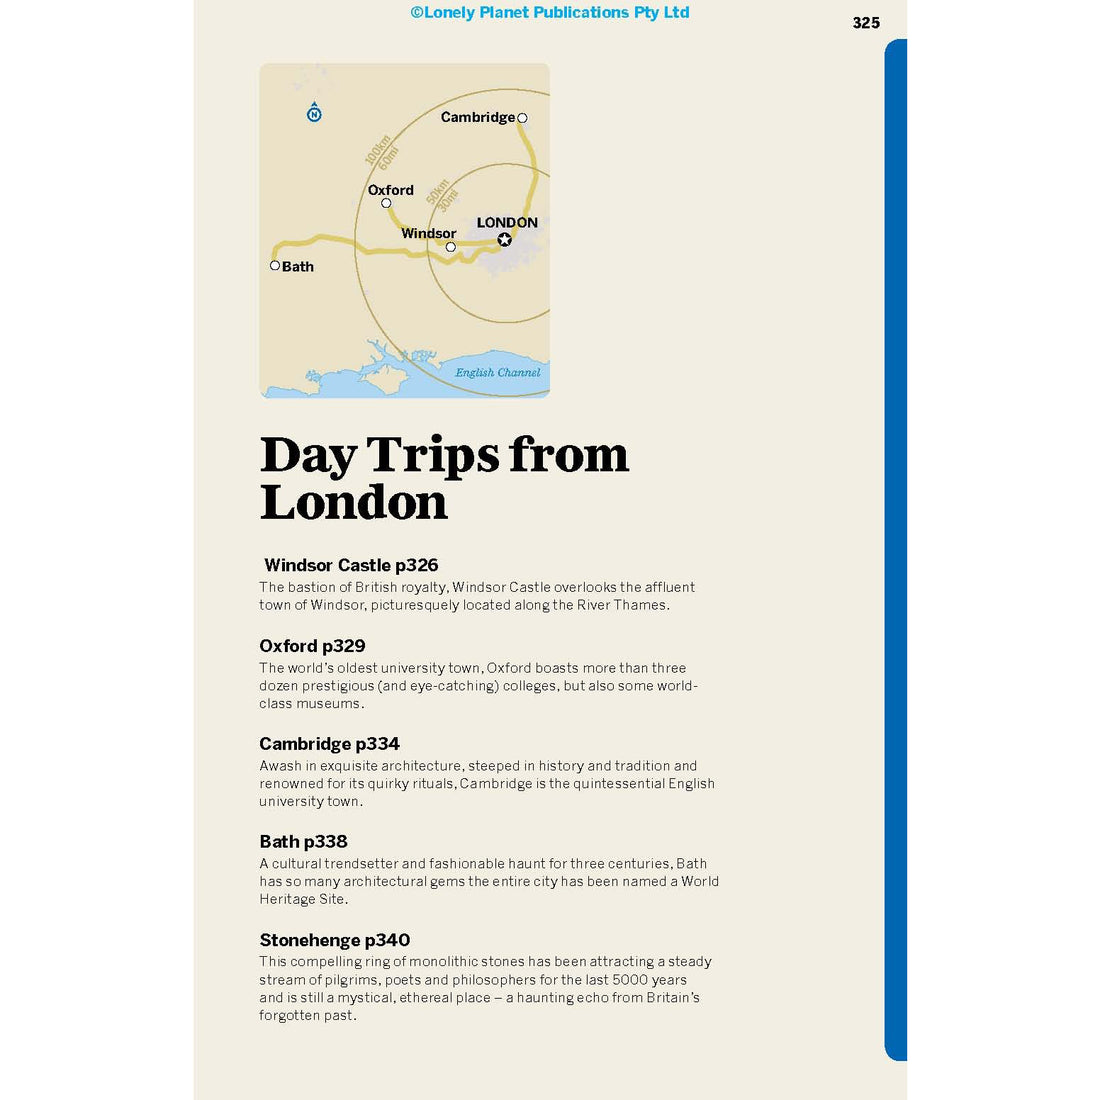 book-lonely-planet-london-11e- (17)